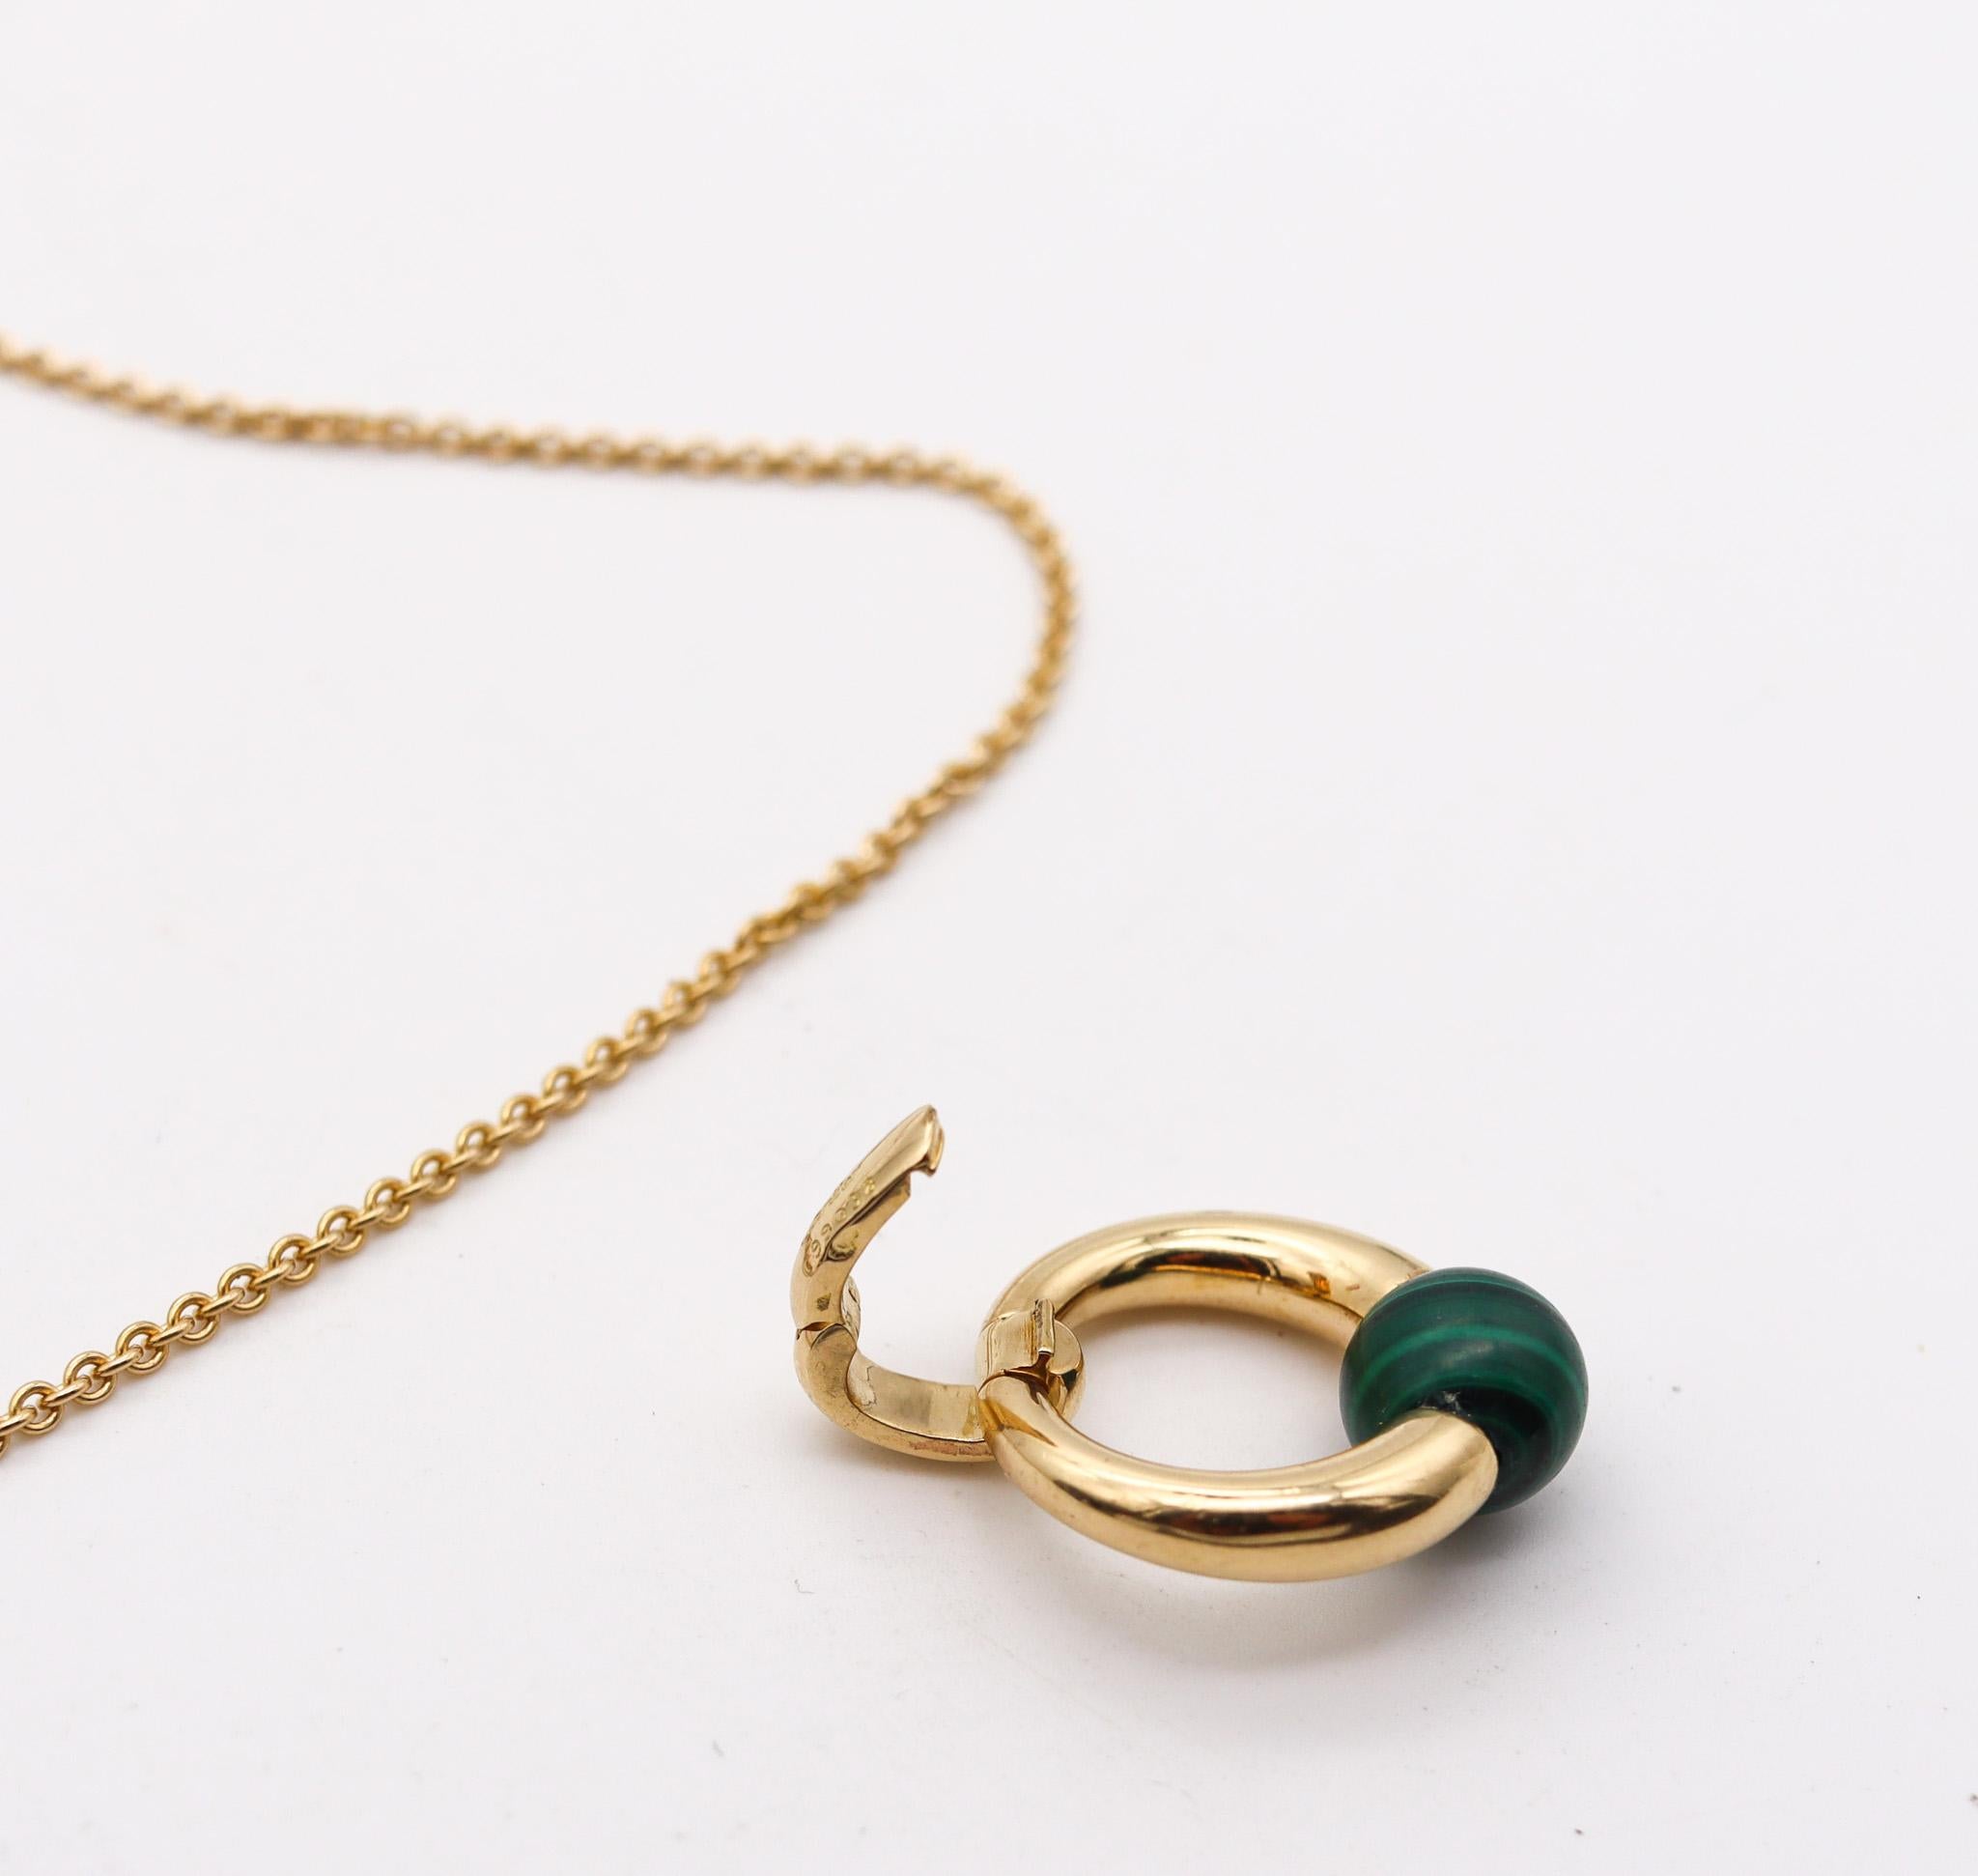 Cabochon Cartier Paris 1994 Rare Necklace Pendant In 18Kt Yellow Gold With Malachite For Sale